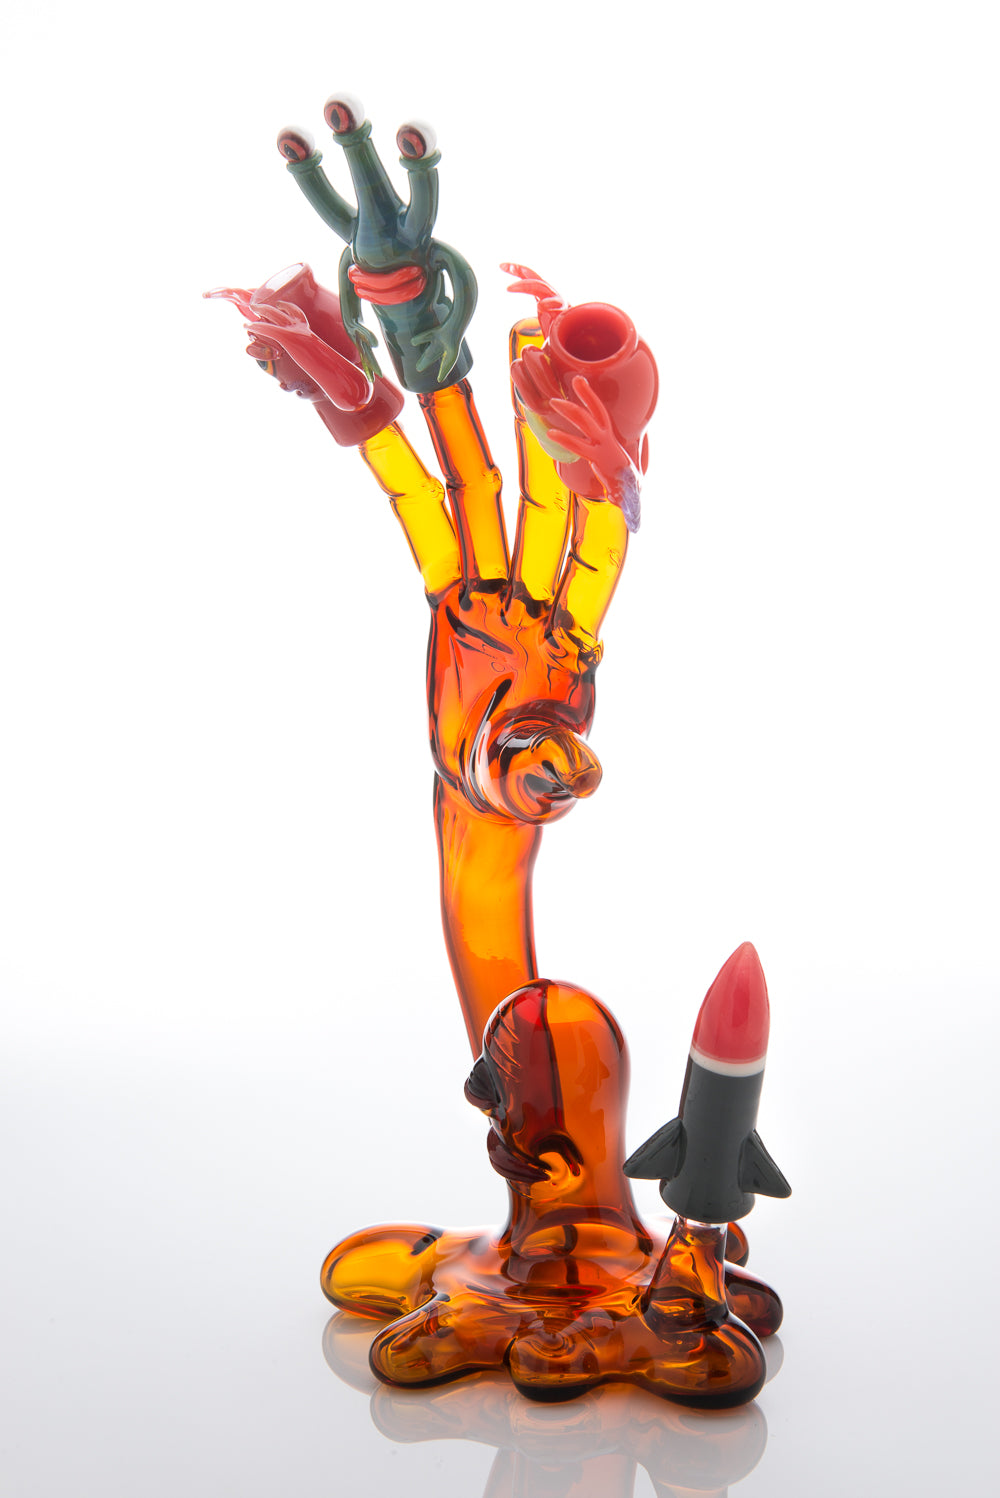 Alien Finger Puppet Hand Vapor Bubbler and Dome Holder Collaboration by Joe Peters, Robert Mickelsen, and Elbo